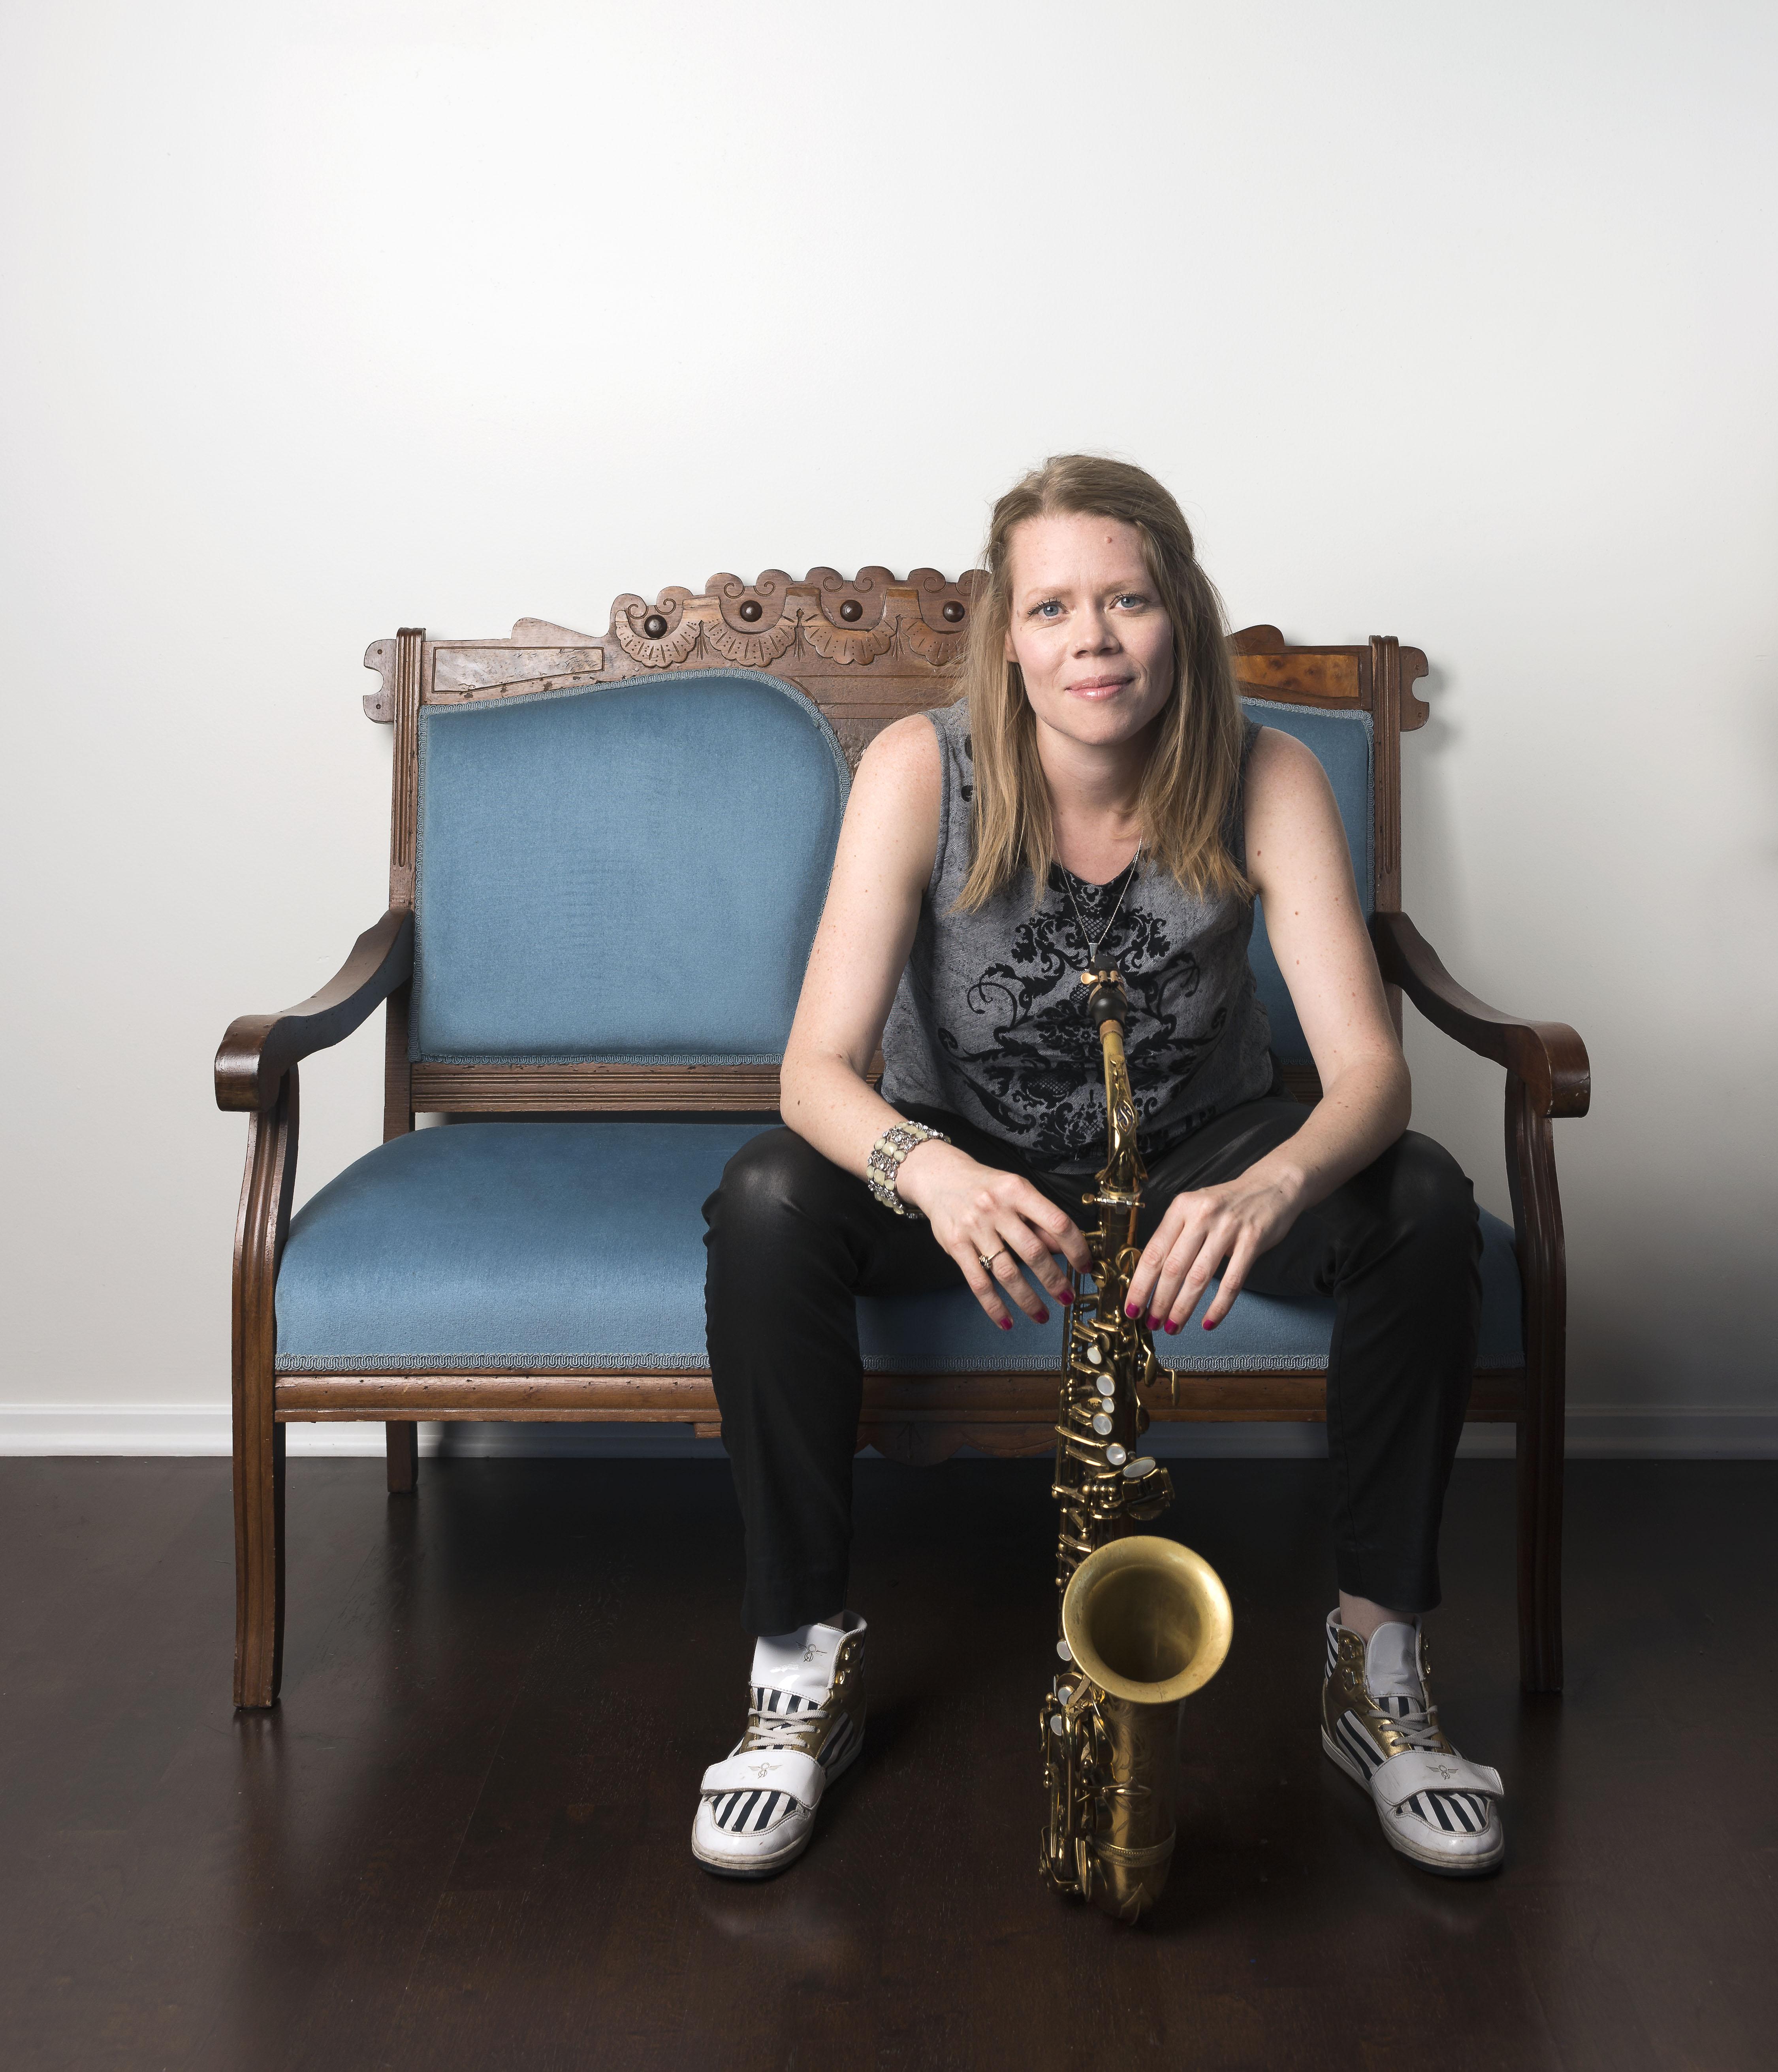 A blond, light-skinned woman sits facing forward and holding a saxophone that rests on the floor with both hands.